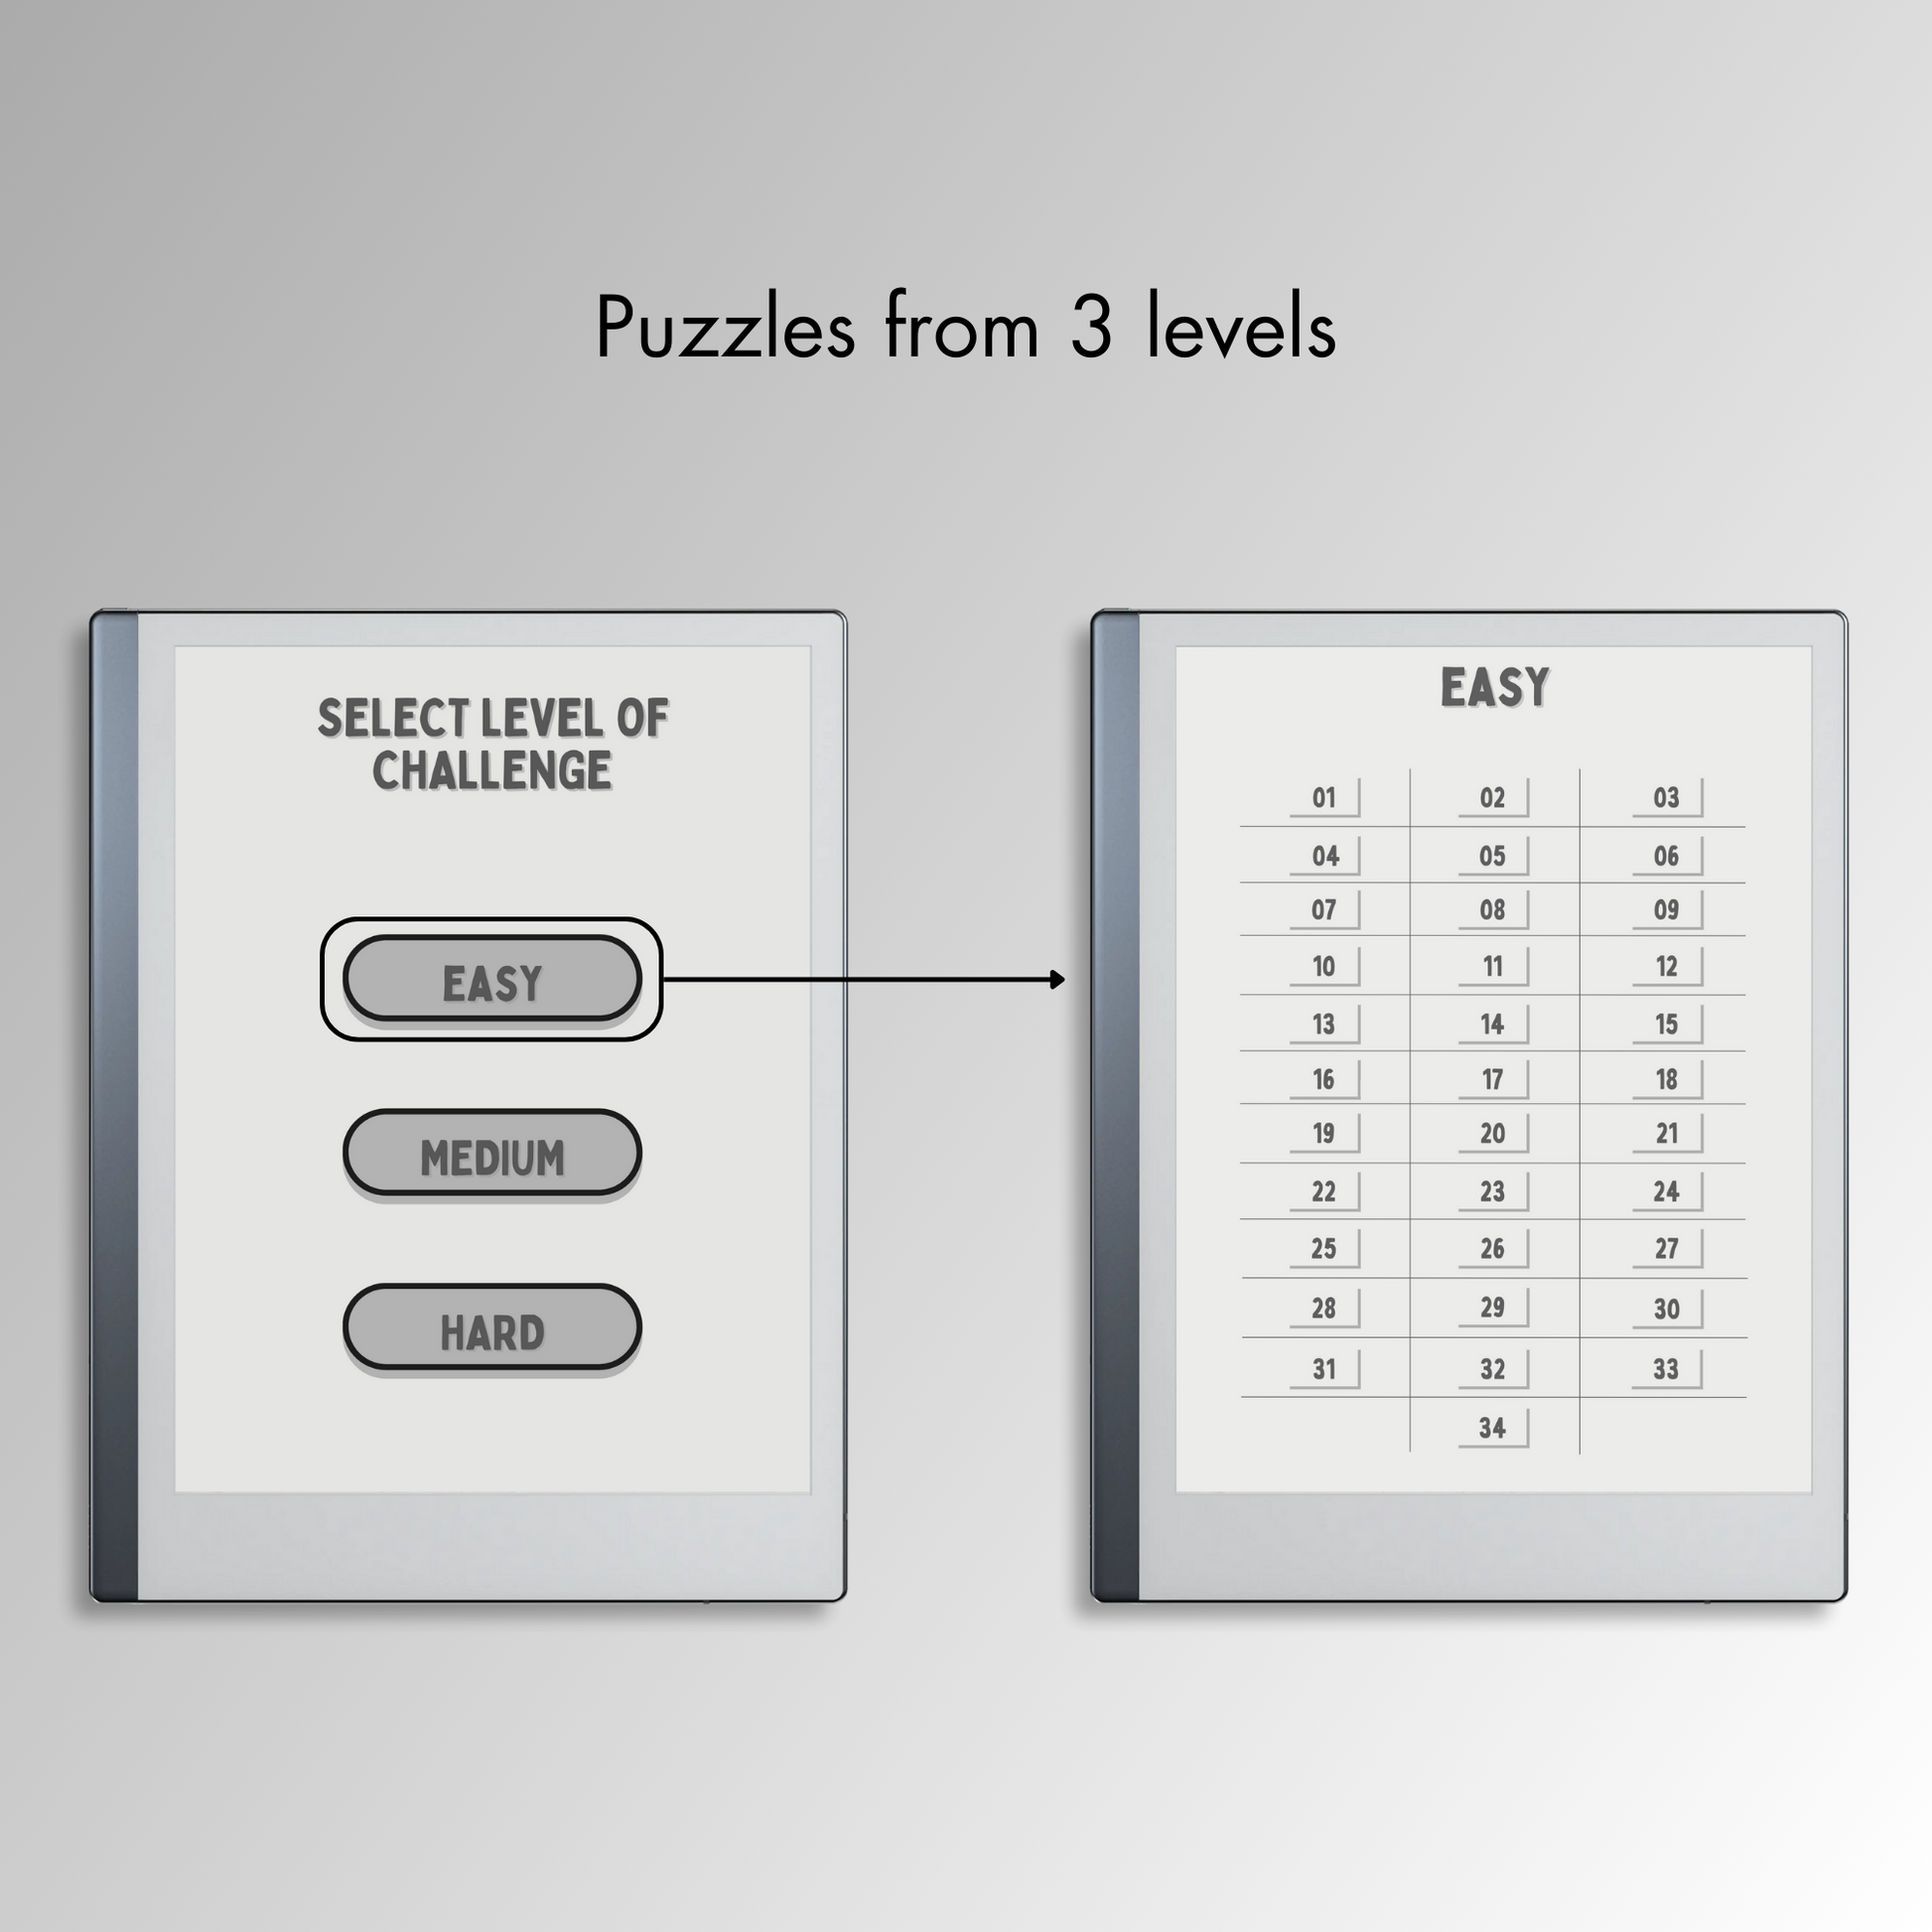 Remarkable 2 Sudoku Puzzles in 3 different levels.